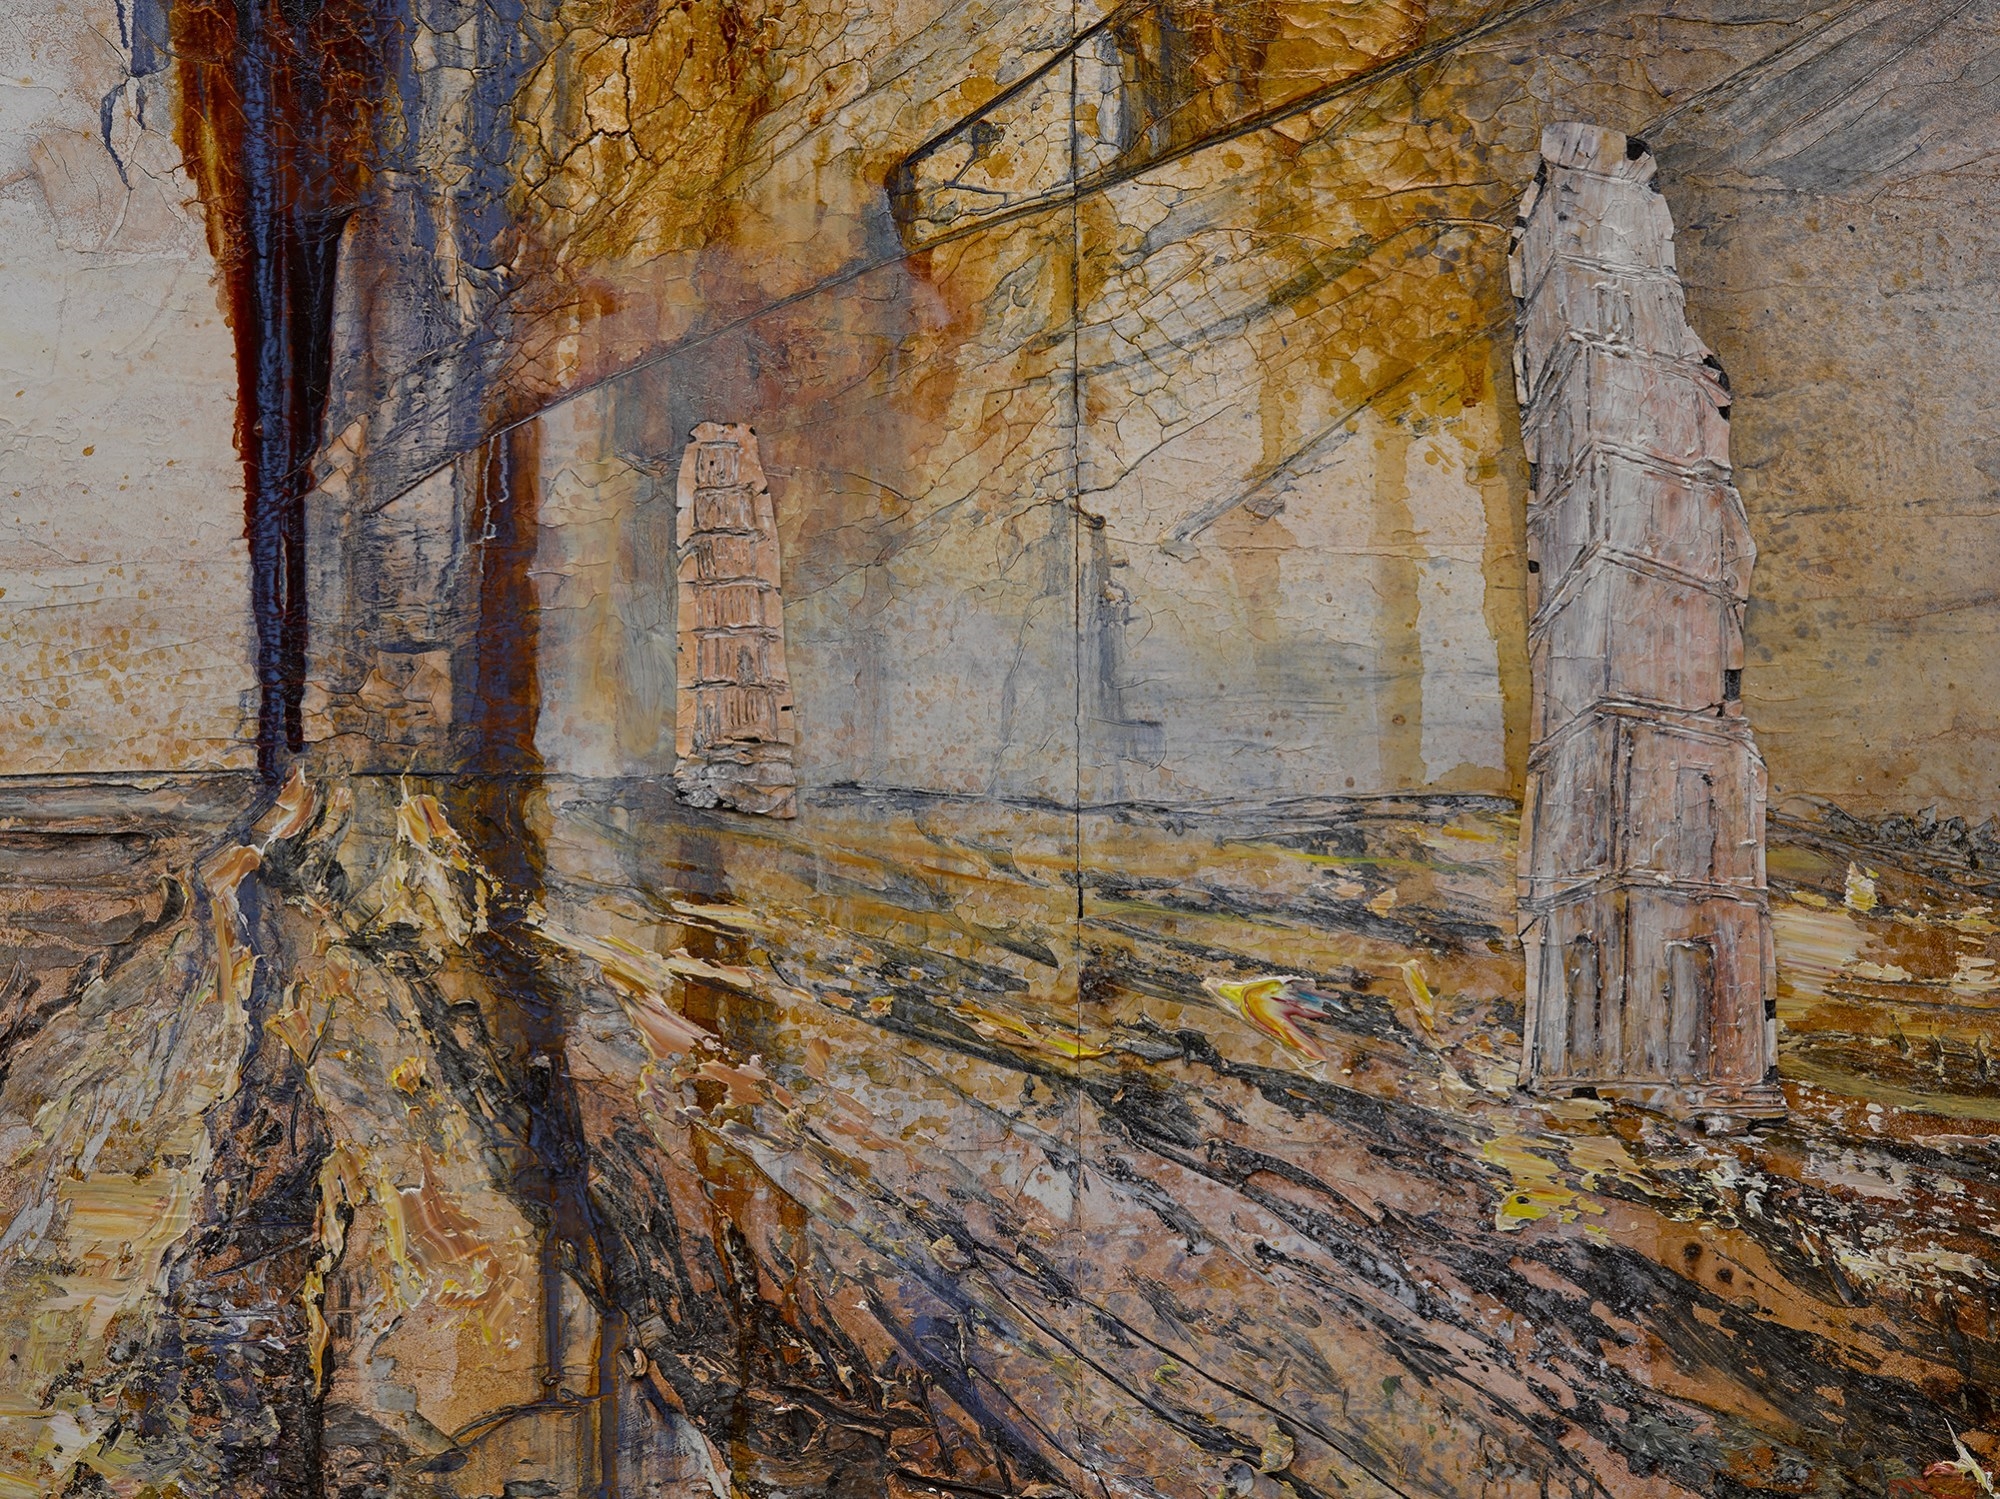 Artwork by Anselm Kiefer, Walhalla, Made of oil, acrylic, emulsion and shellac on canvas, in 3 parts